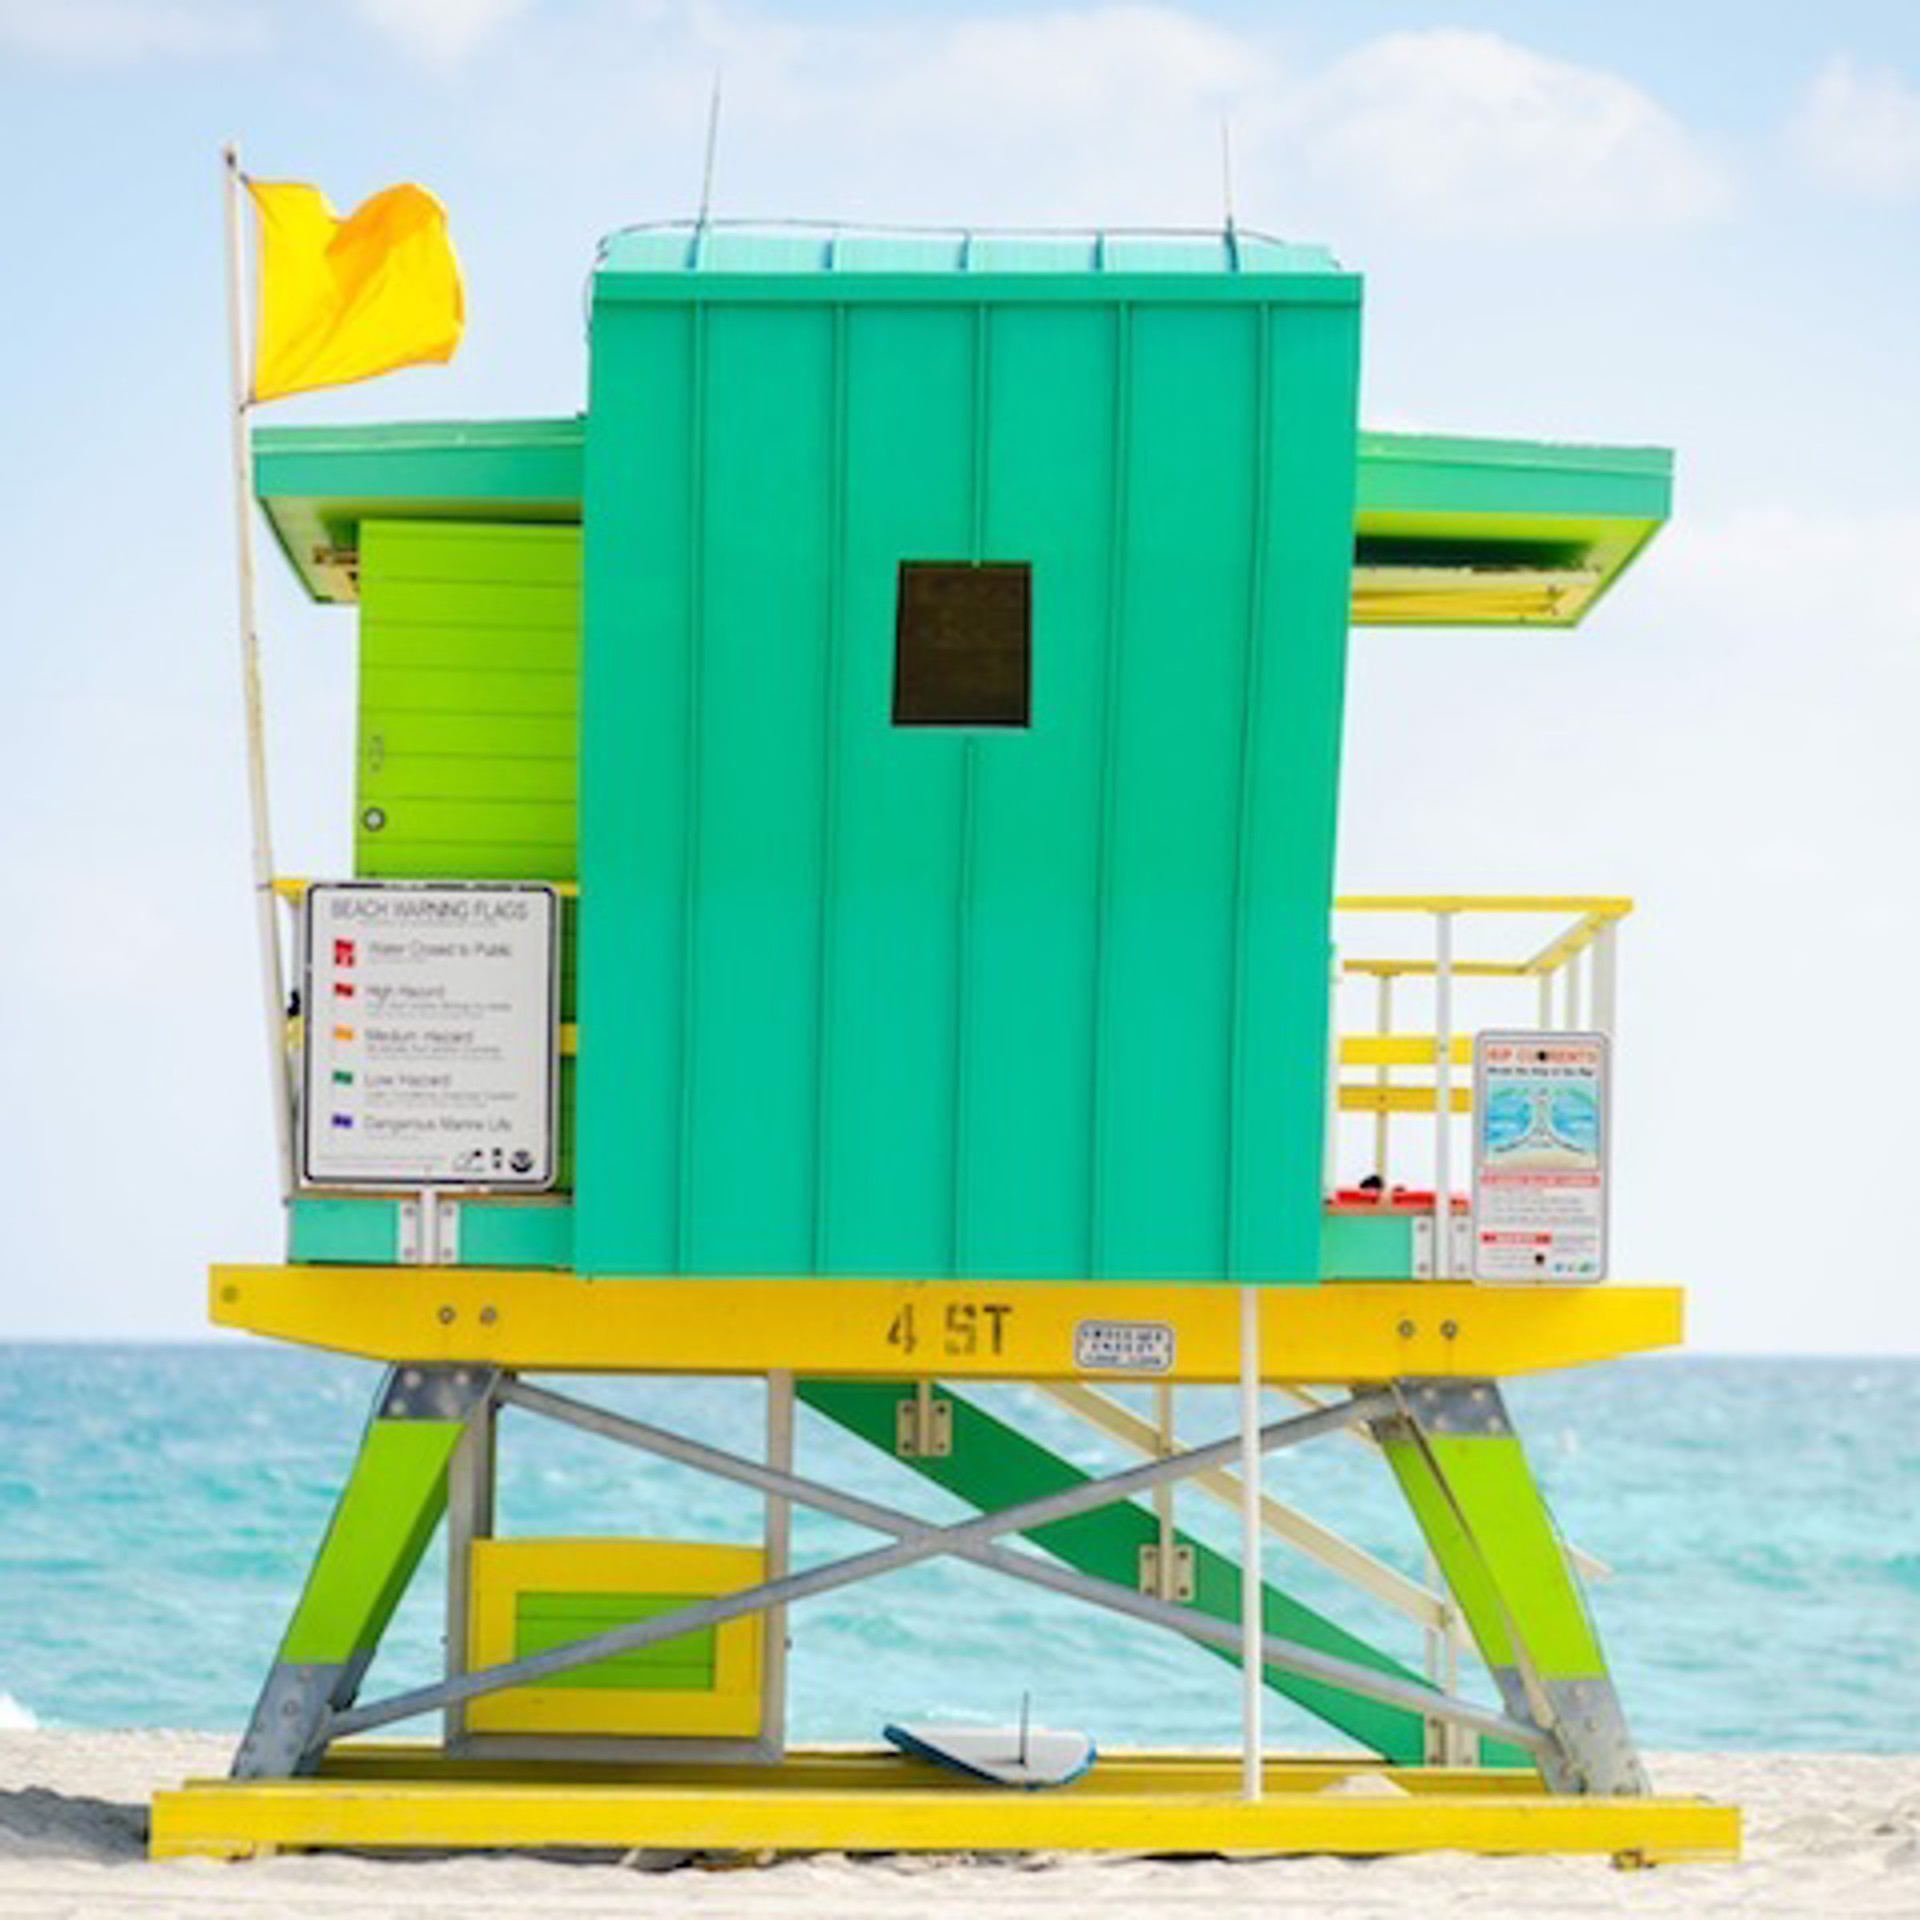 4th Street Lifeguard Stand, Rear View by Peter Mendelson